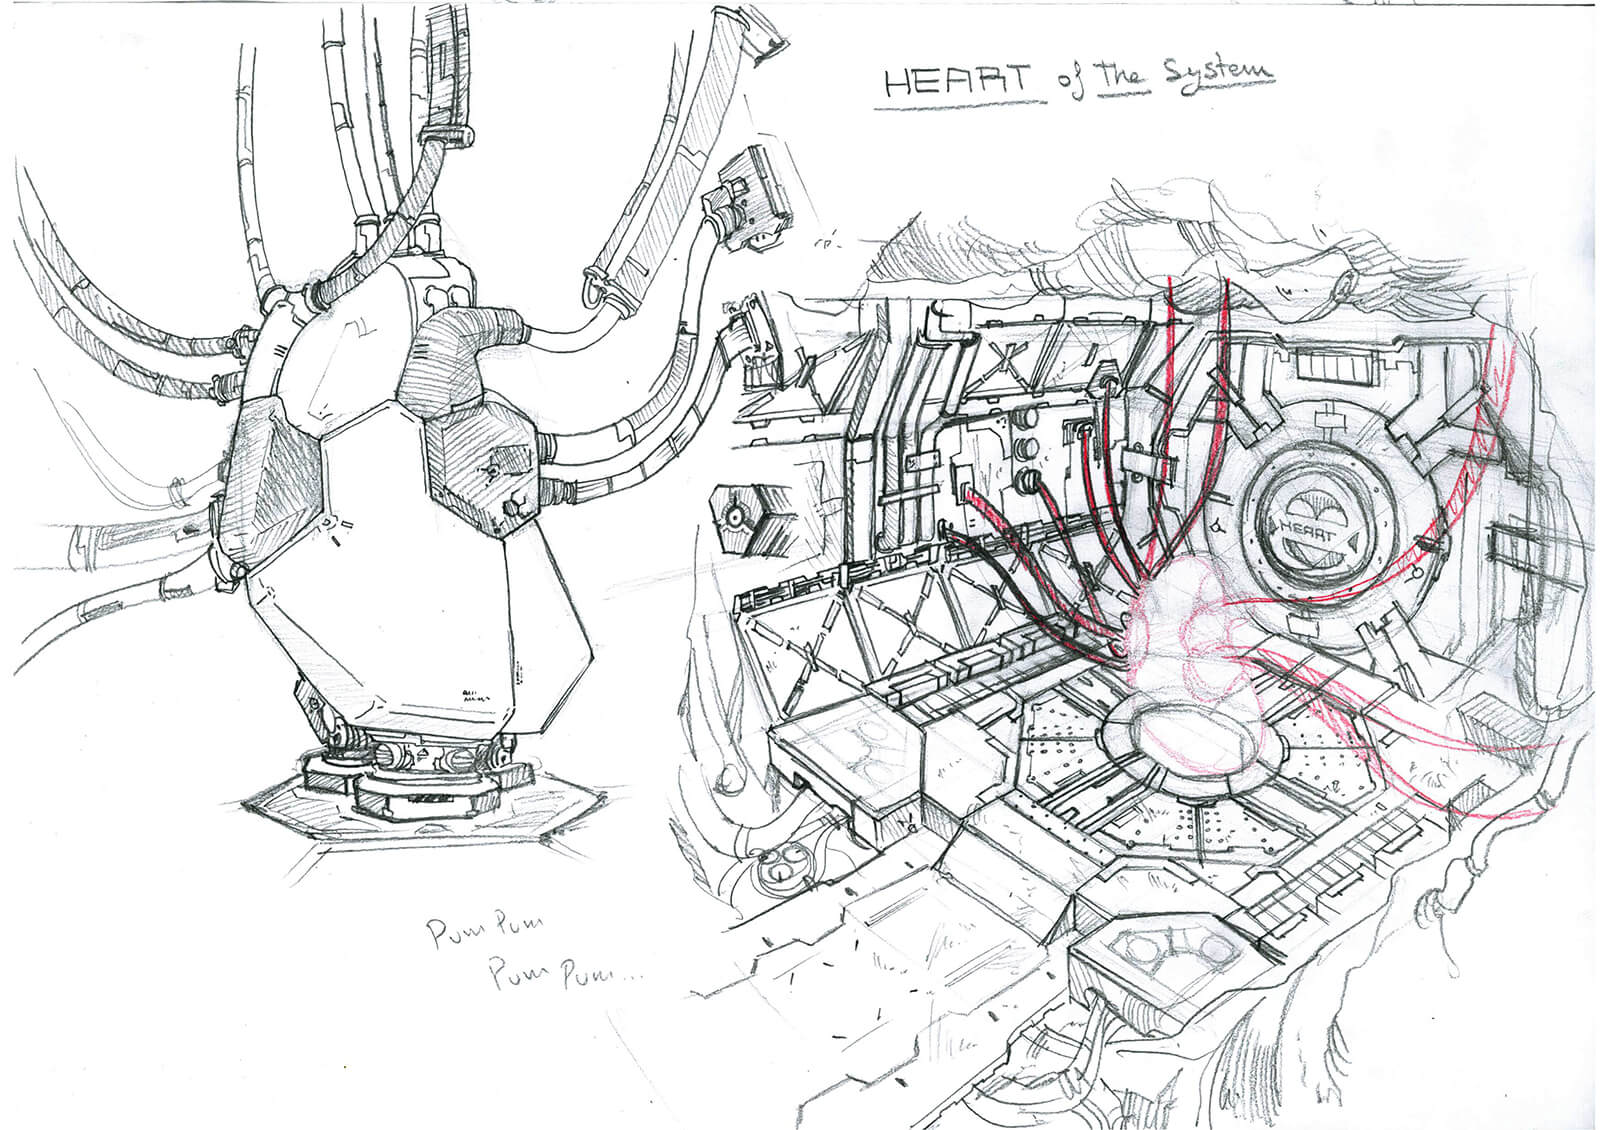 Black-and-white sketch of the &quot;Heart of the System&quot; from the film Heart Level, a white machine connected by several tubes